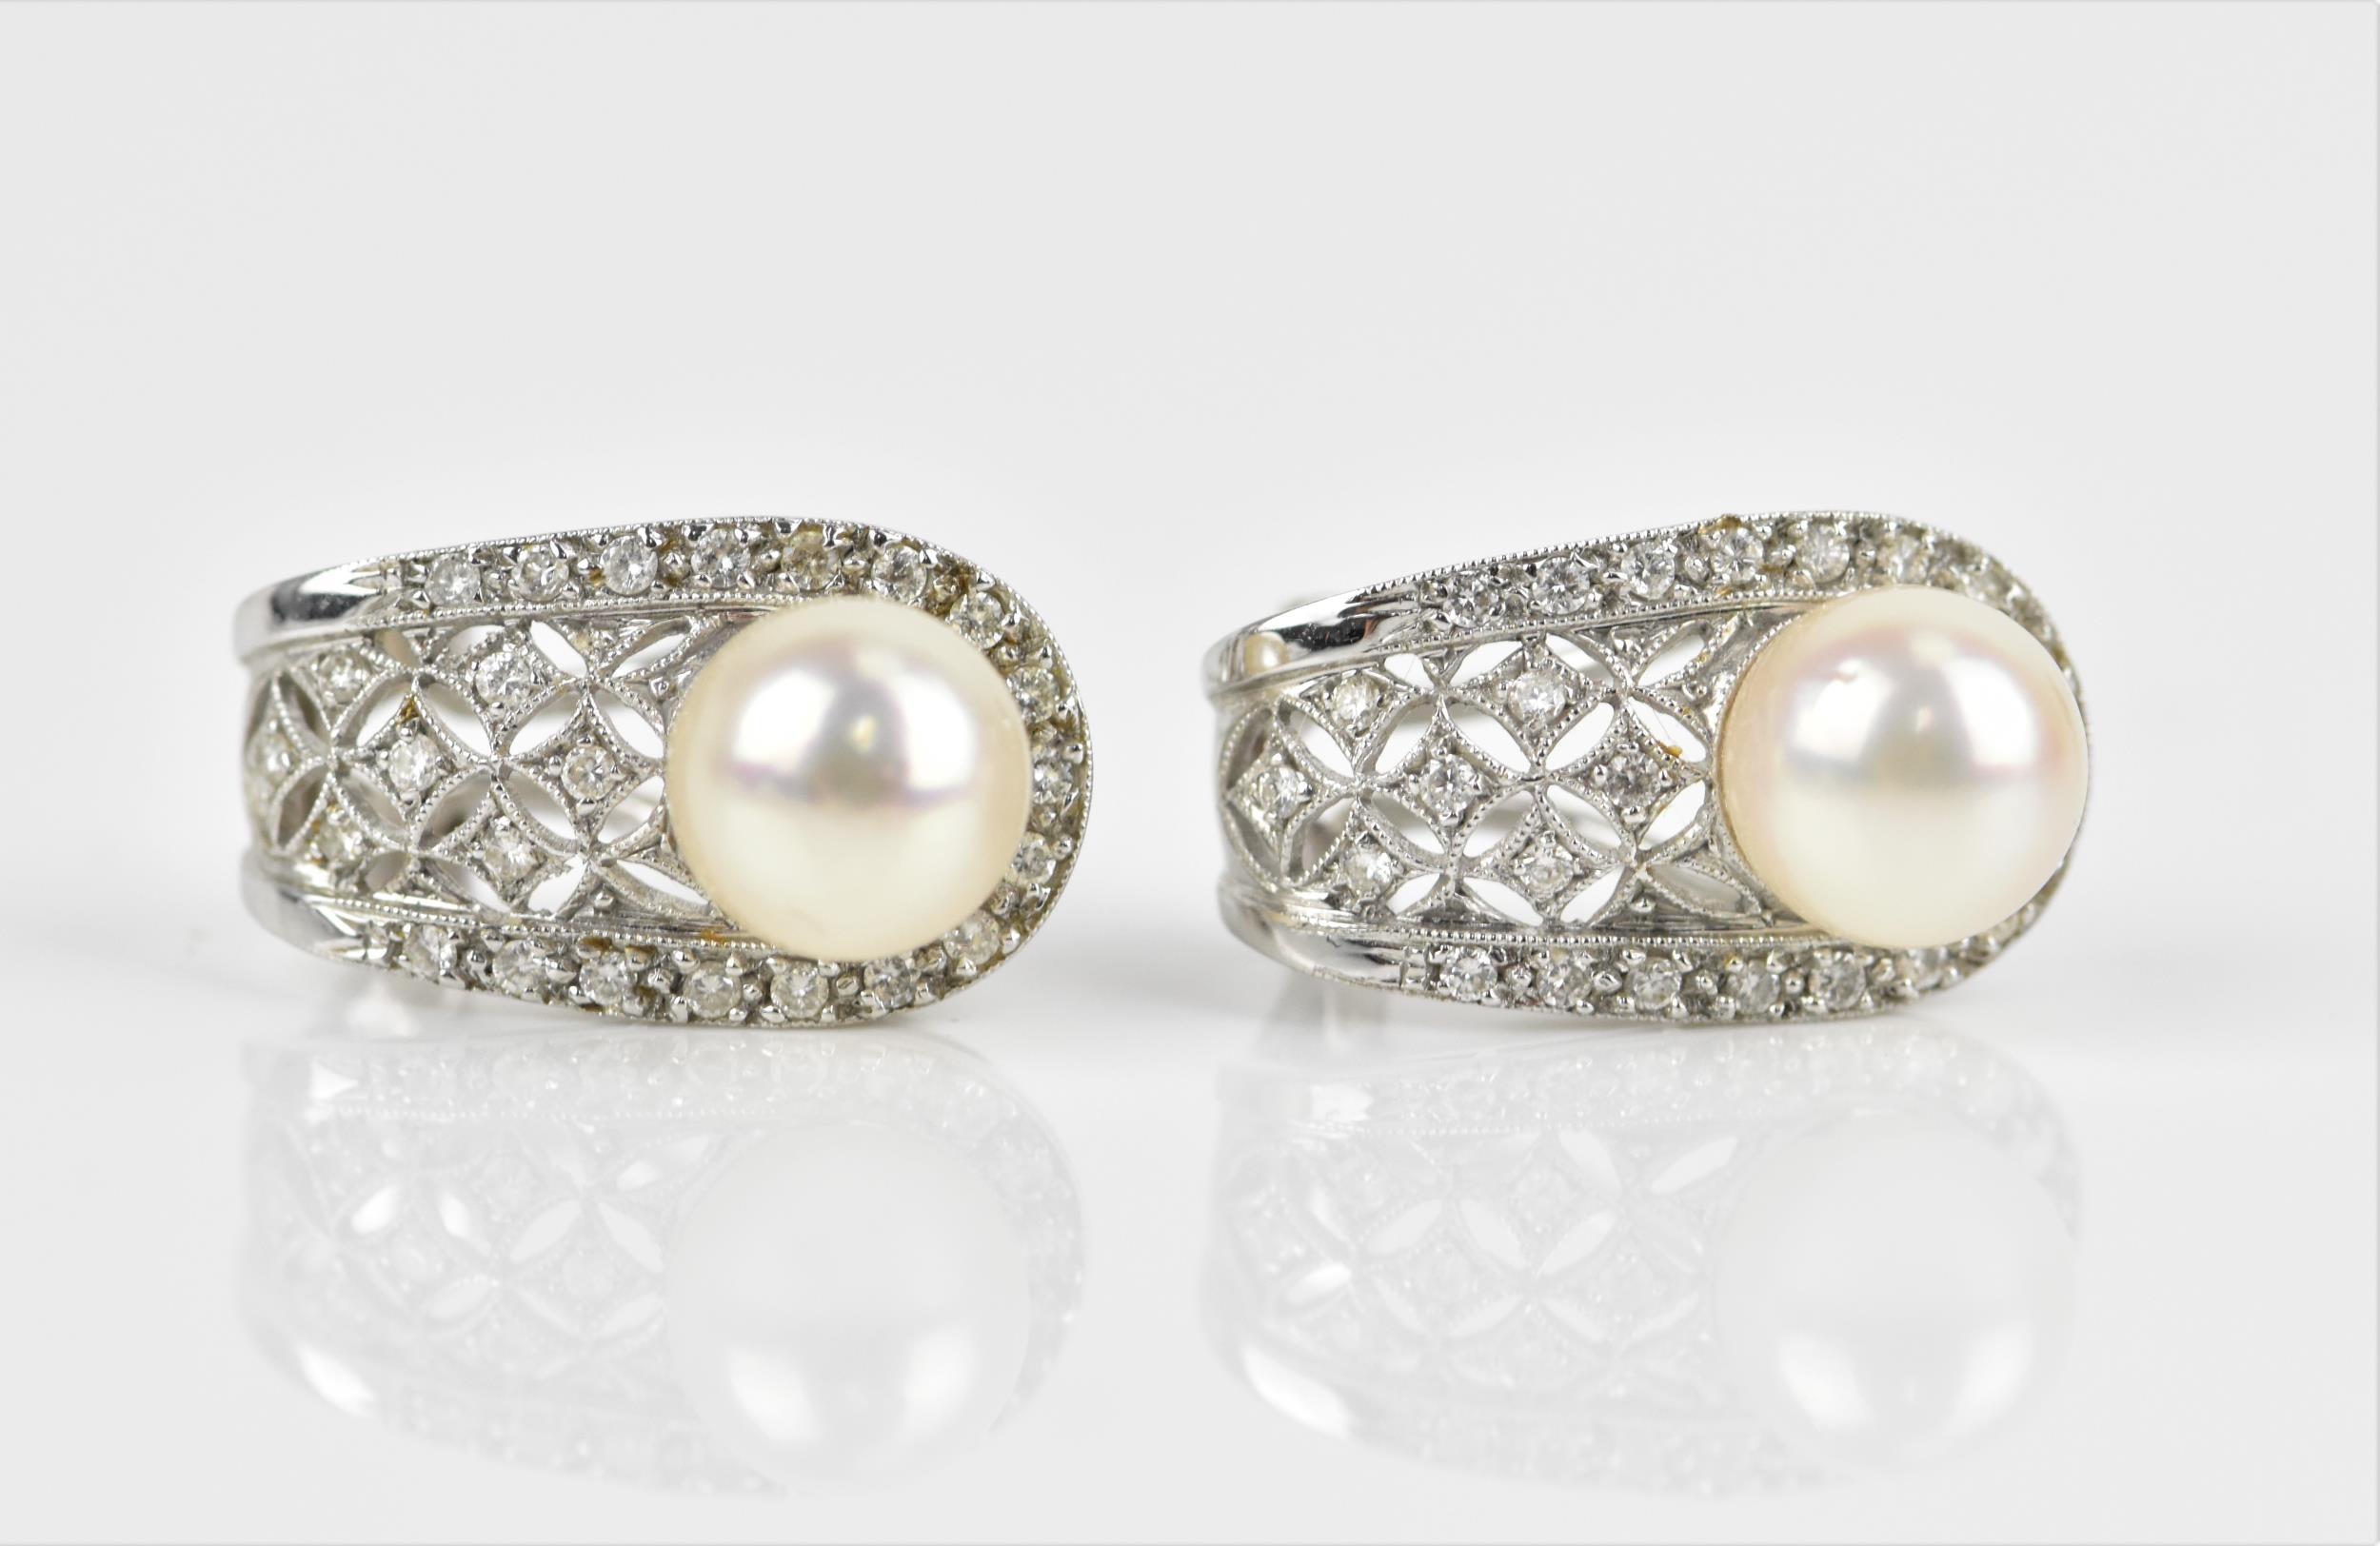 A pair of 18ct white gold, diamond and pearl earrings, of pierced lattice design, each inset with